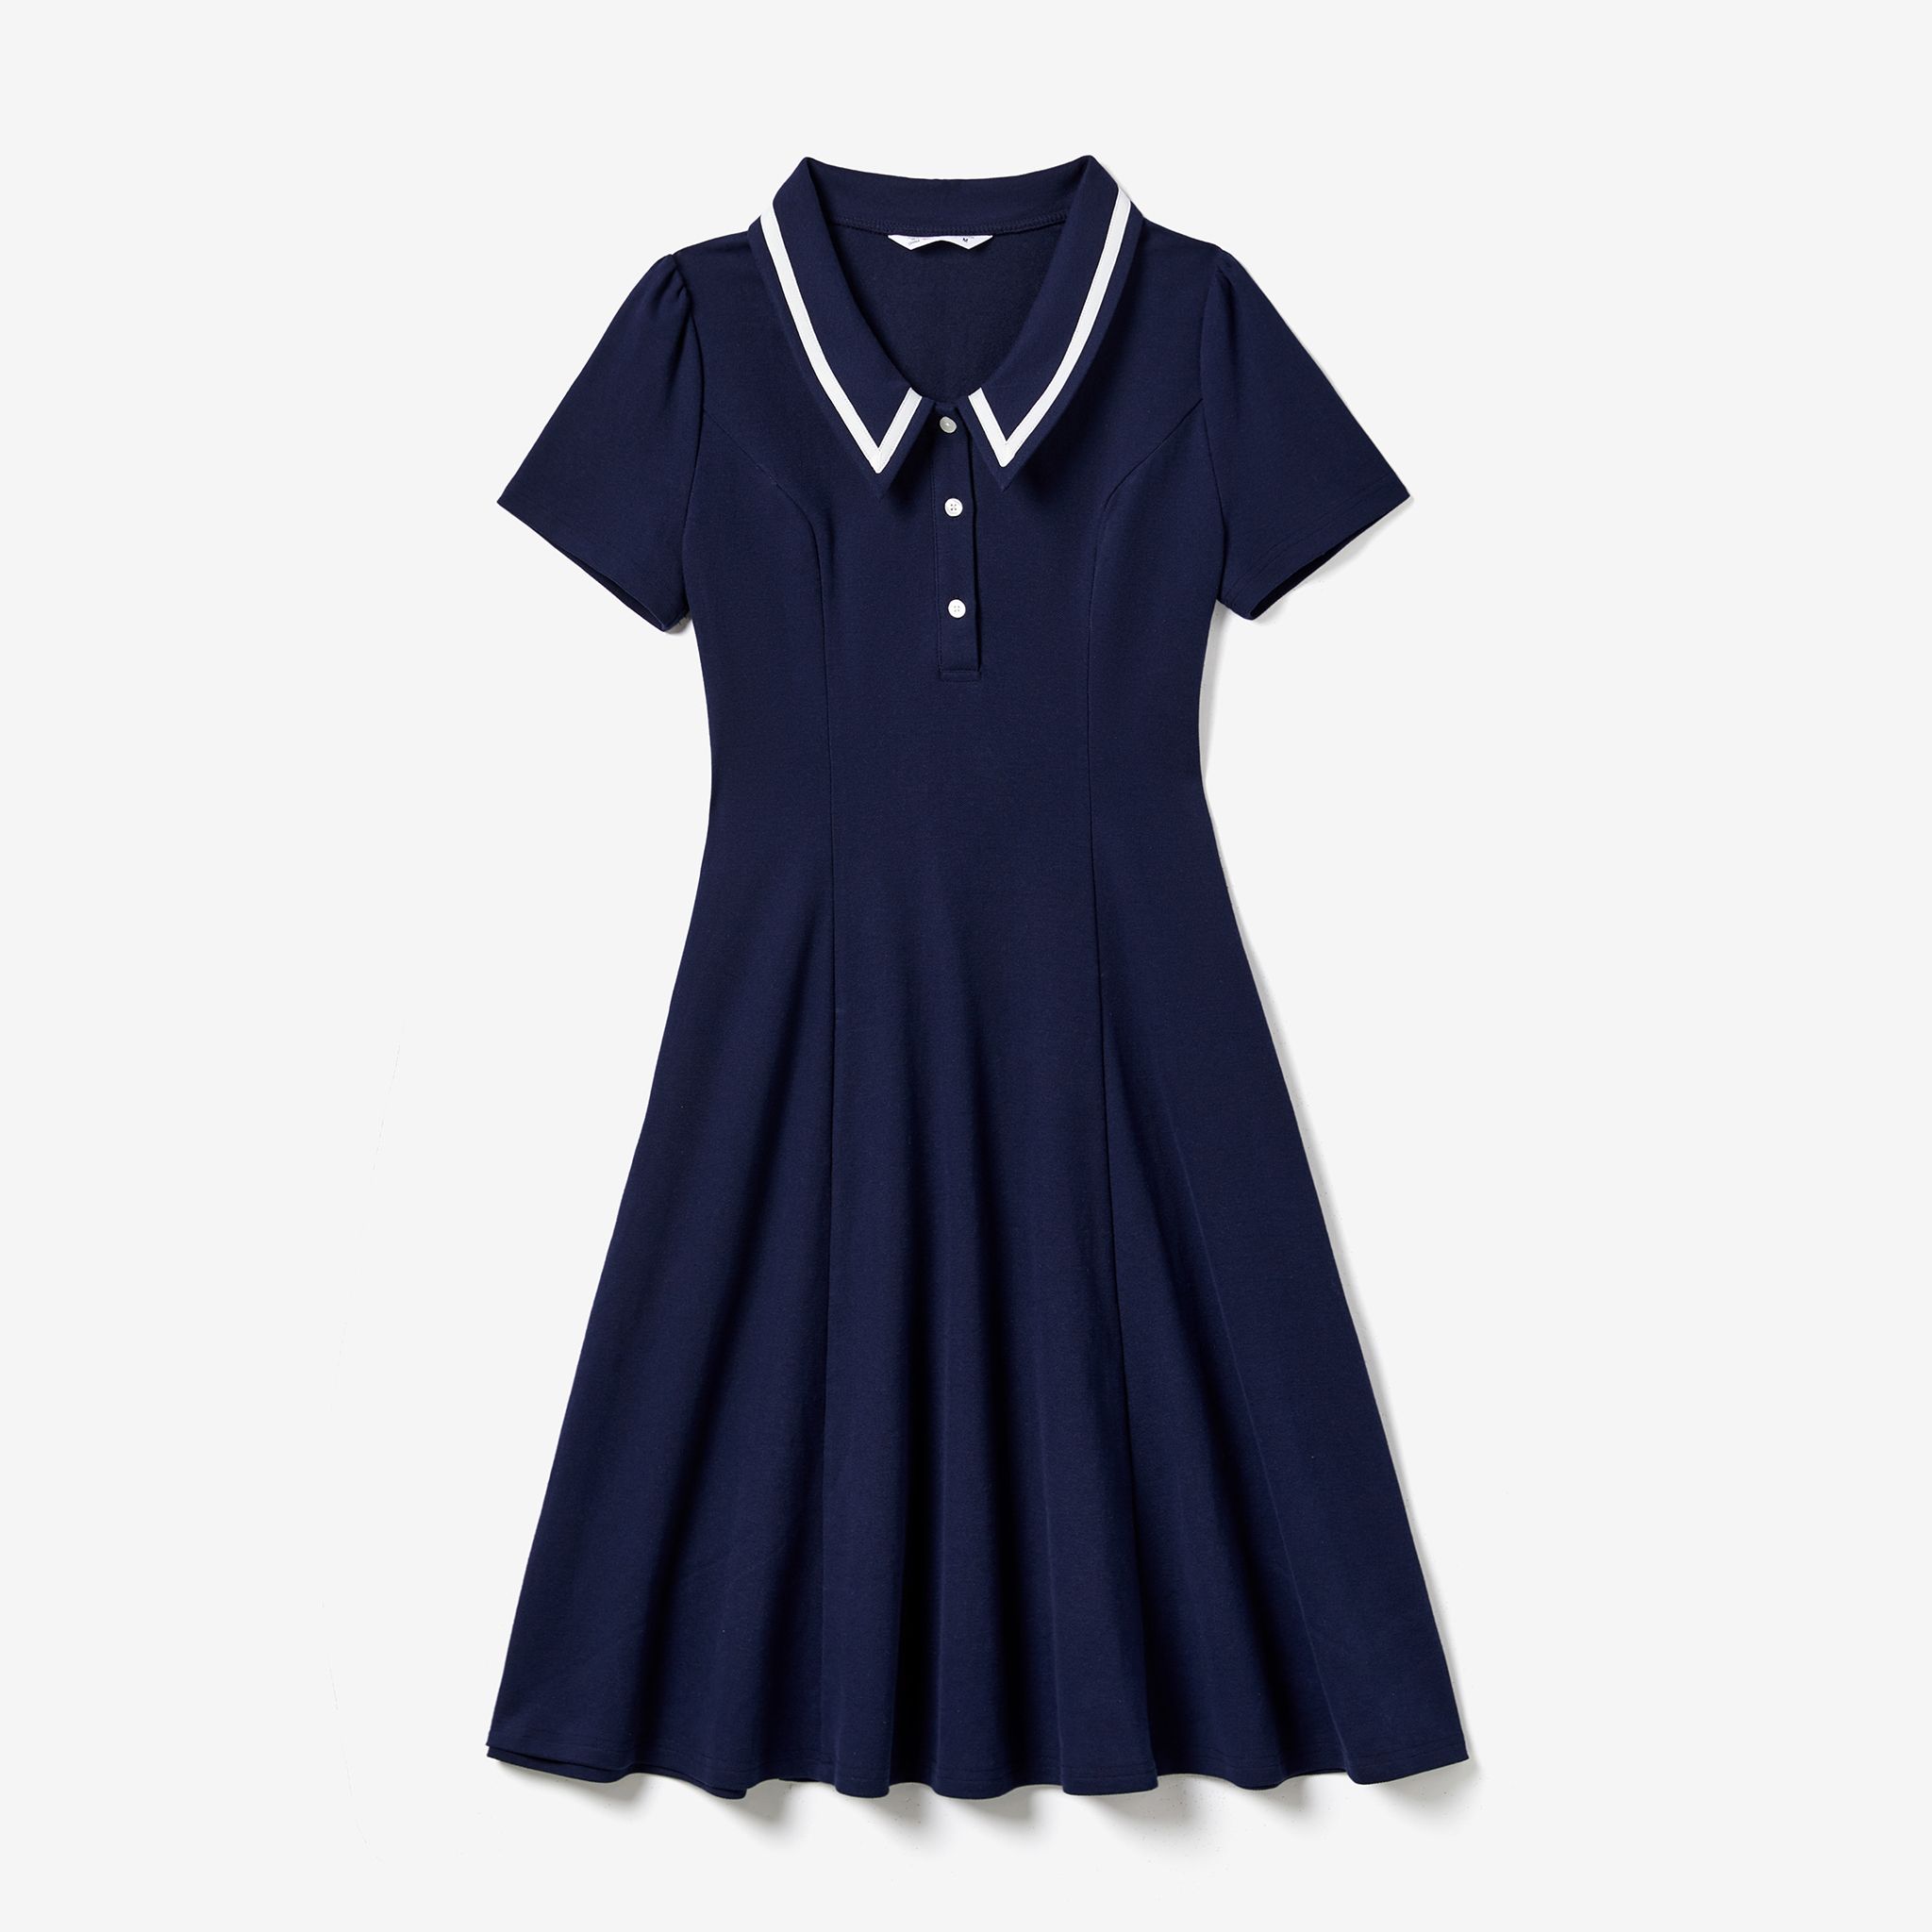 Famille Assortie Casual Bleu Marine À Manches Courtes Rayures Polos Chemises Et Col Marin Solide Smocked Ourlet Robes Ensembles